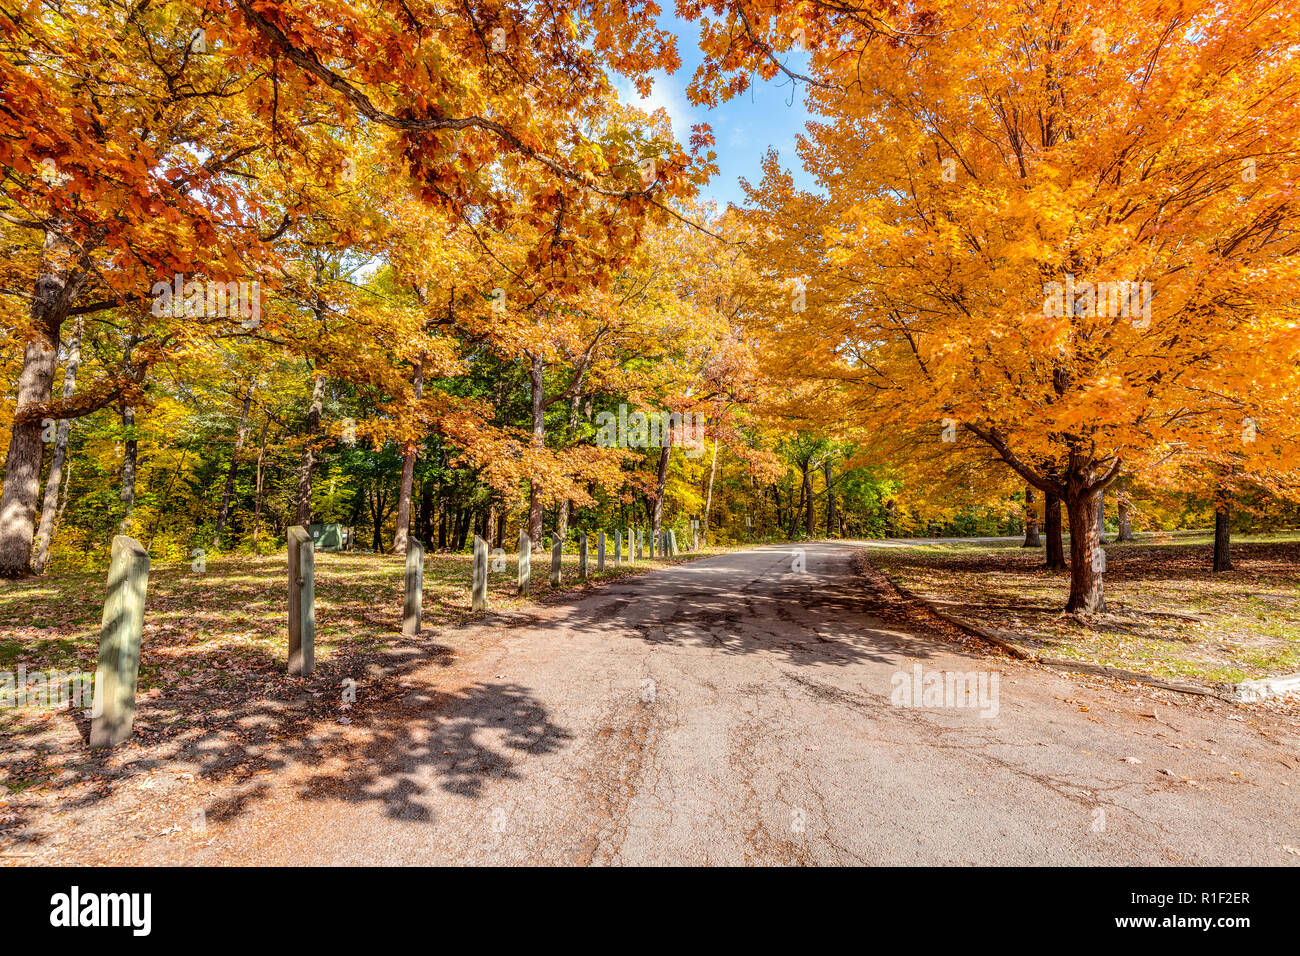 A road in the fall at Matthiesen State Park with the foliage turning yellow/orange and the leaves falling off of the trees with a blue sky. Stock Photo